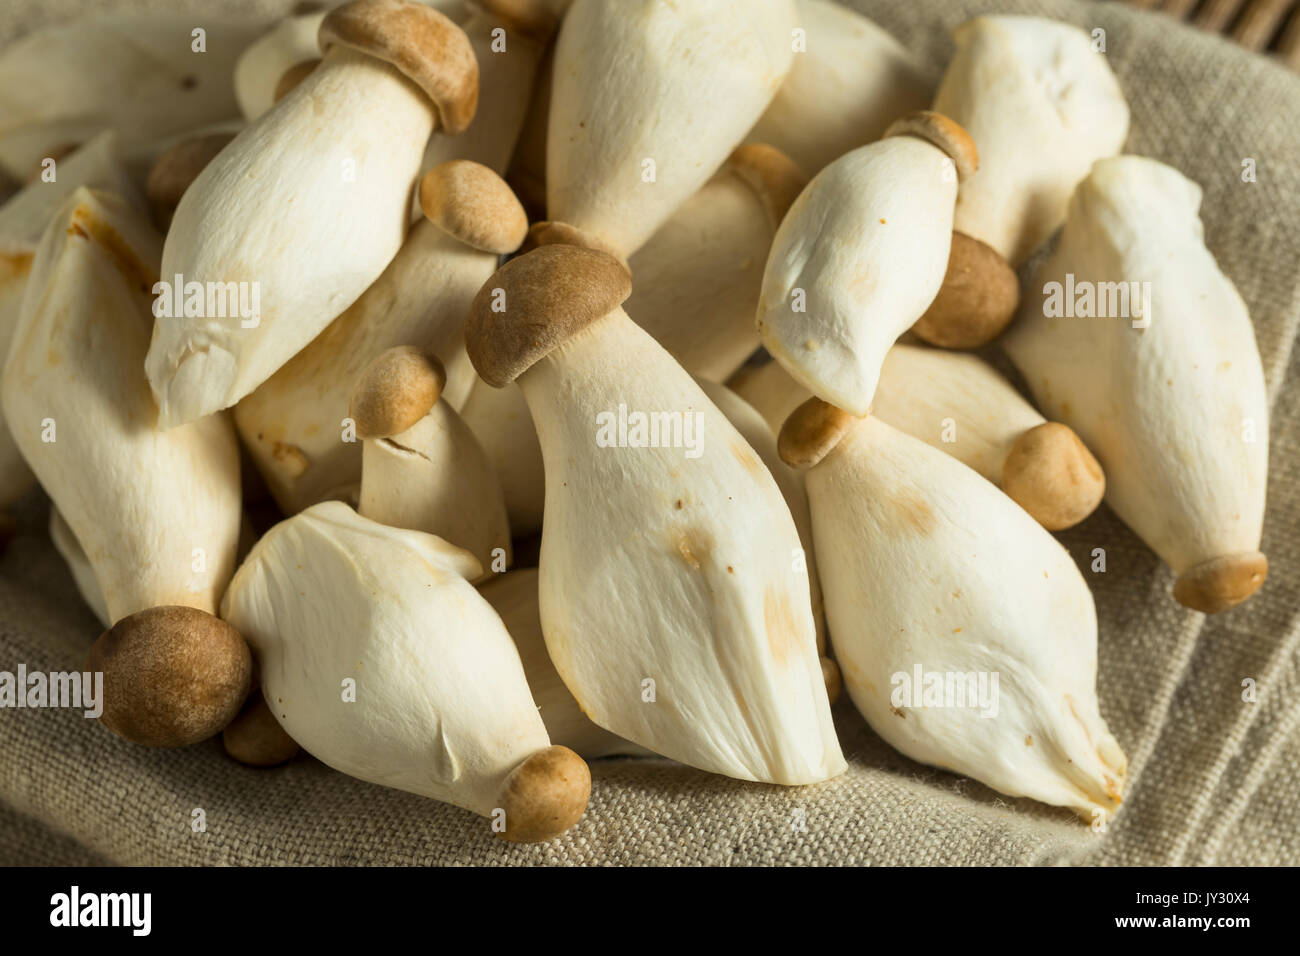 Raw Organic Baby King Oyster Mushrooms Ready to Eat Stock Photo